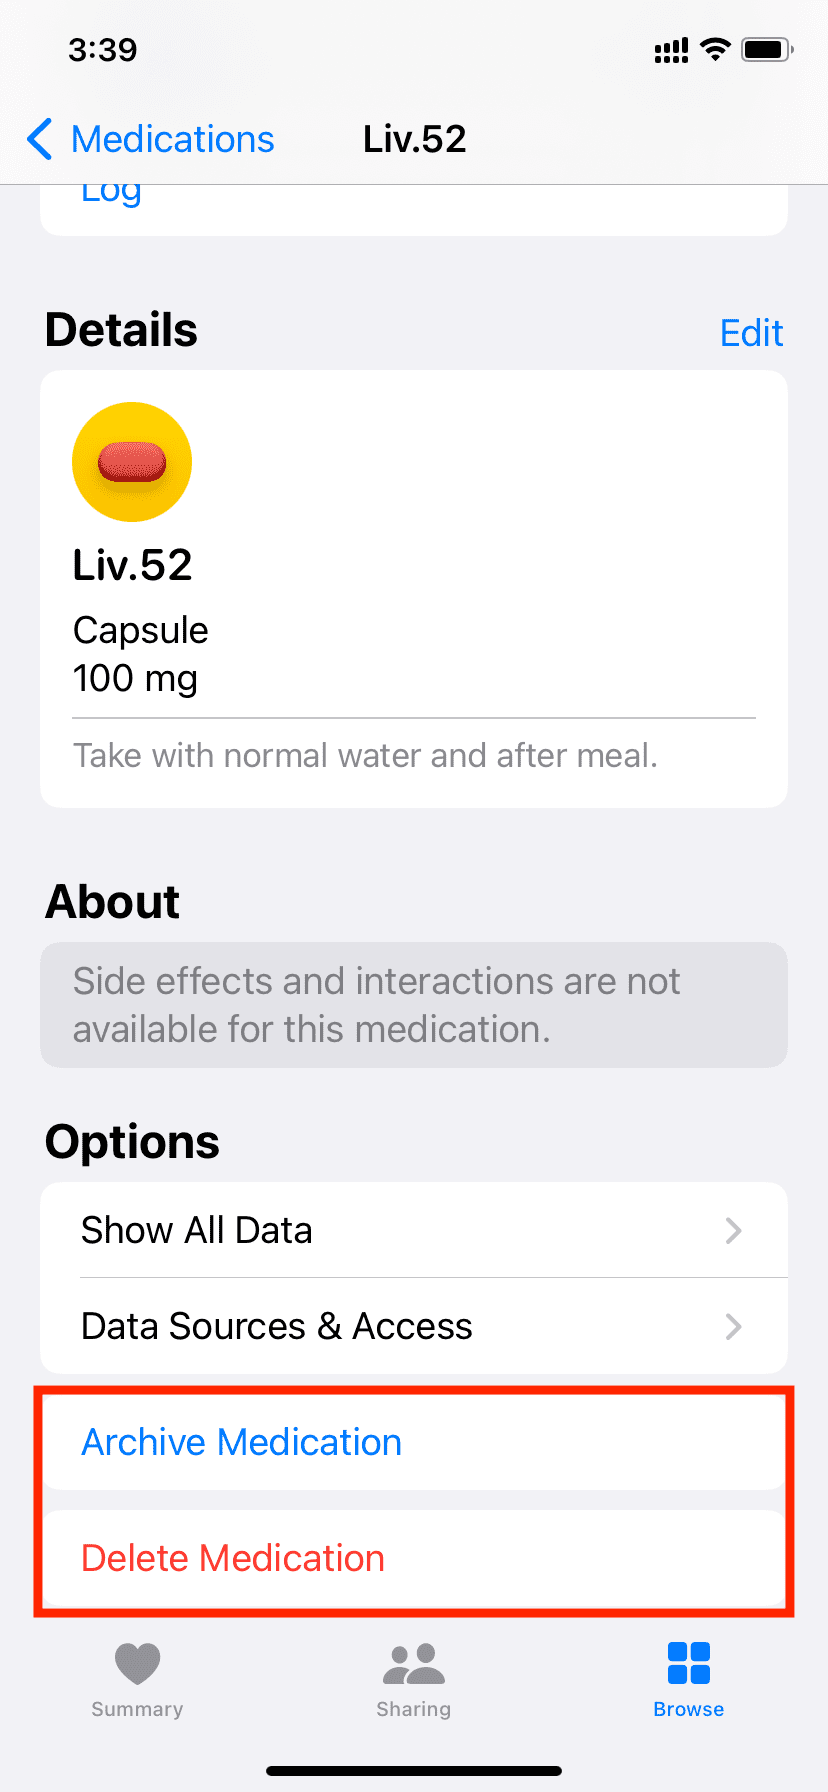 Archive or delete medication in iPhone Health app